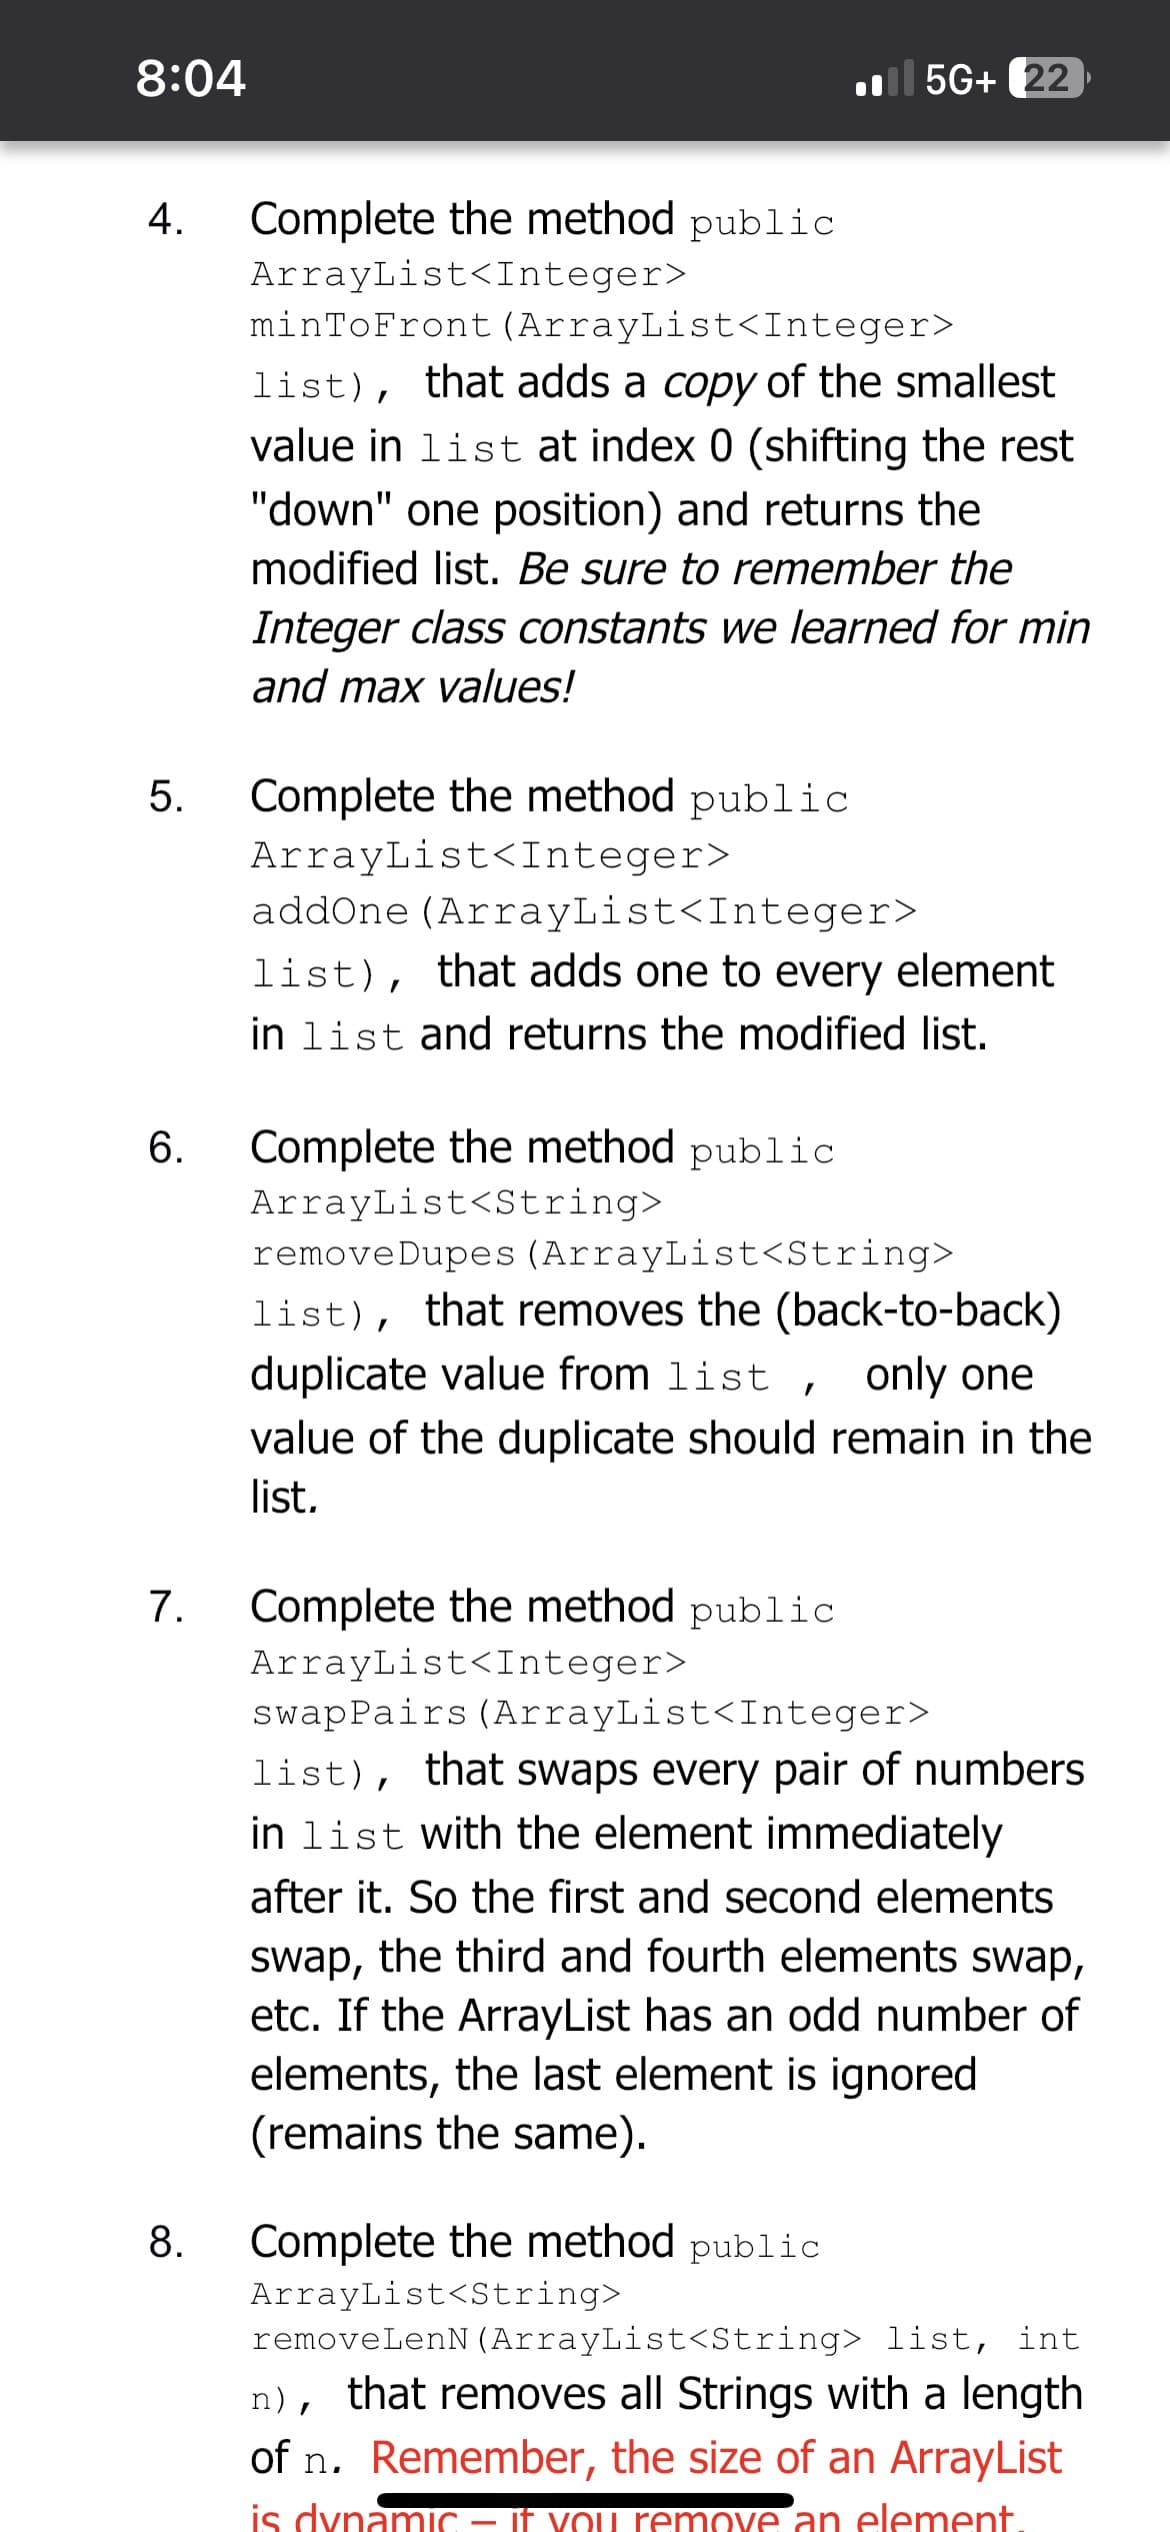 8:04
4. Complete the method public
ArrayList<Integer>
5.
6.
7.
minToFront (ArrayList<Integer>
list), that adds a copy of the smallest
value in list at index 0 (shifting the rest
"down" one position) and returns the
modified list. Be sure to remember the
Integer class constants we learned for min
and max values!
Complete the method public
ArrayList<Integer>
5G+ 22
addOne (ArrayList<Integer>
list), that adds one to every element
in list and returns the modified list.
Complete the method public
ArrayList<String>
remove Dupes (ArrayList<String>
list), that removes the (back-to-back)
duplicate value from list, only one
value of the duplicate should remain in the
list.
Complete the method public
ArrayList<Integer>
swapPairs (ArrayList<Integer>
list), that swaps every pair of numbers
in list with the element immediately
after it. So the first and second elements
swap, the third and fourth elements swap,
etc. If the ArrayList has an odd number of
elements, the last element is ignored
(remains the same).
8. Complete the method public
ArrayList<String>
removeLenN (ArrayList<String> list, int
n), that removes all Strings with a length
of n. Remember, the size of an ArrayList
is dynamic – if you remove an element.